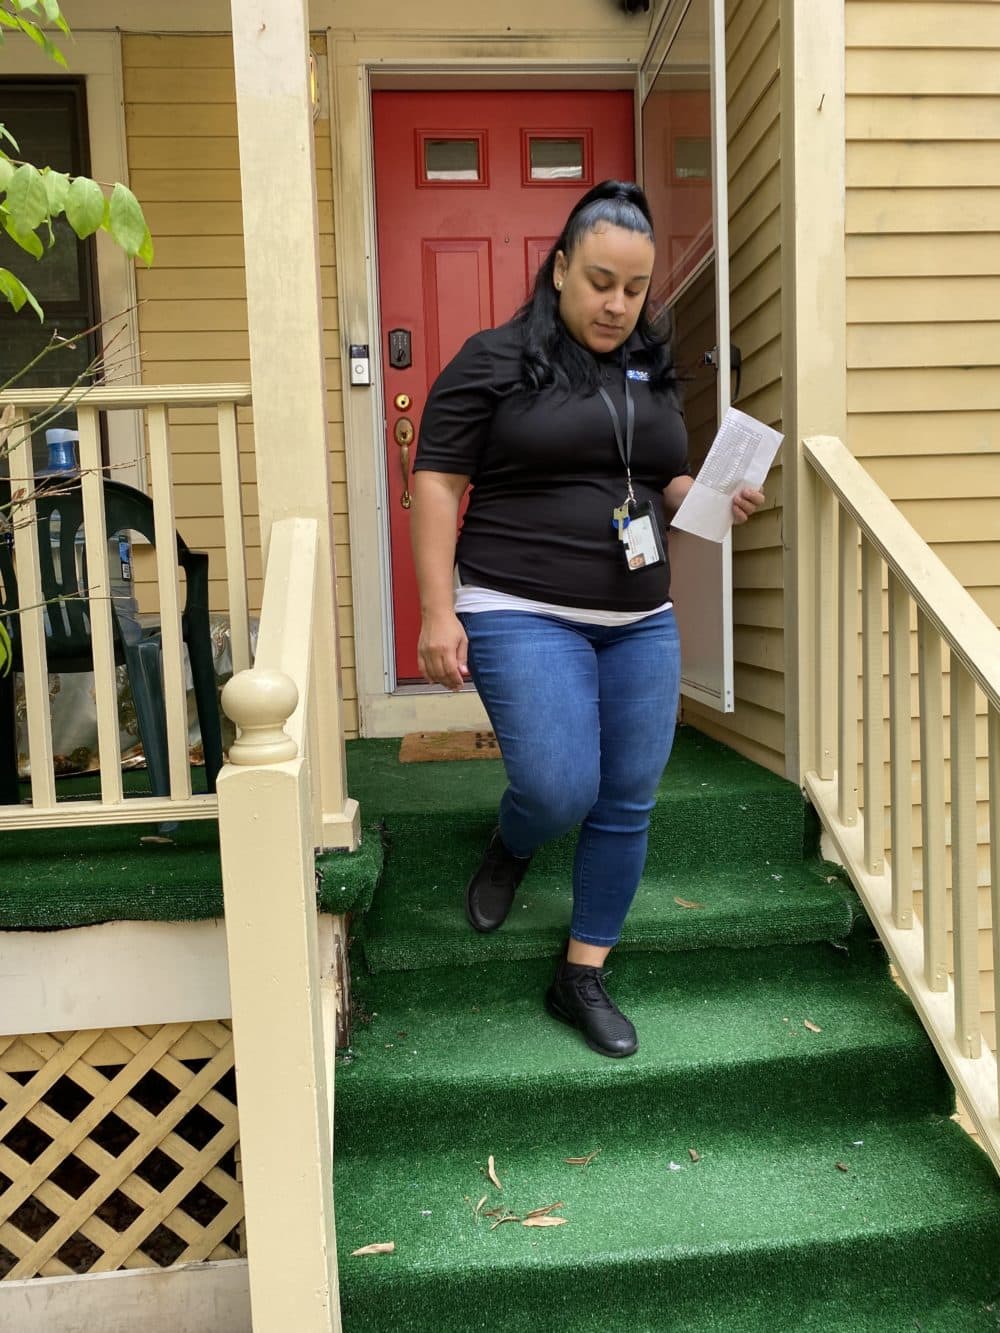 Angie Encarnacion, manager of the Boston Re-engagement Center, visits a home in Jamaica Plain as part of an effort to re-engage student attendance in the new school year. (Suevon Lee/WBUR)